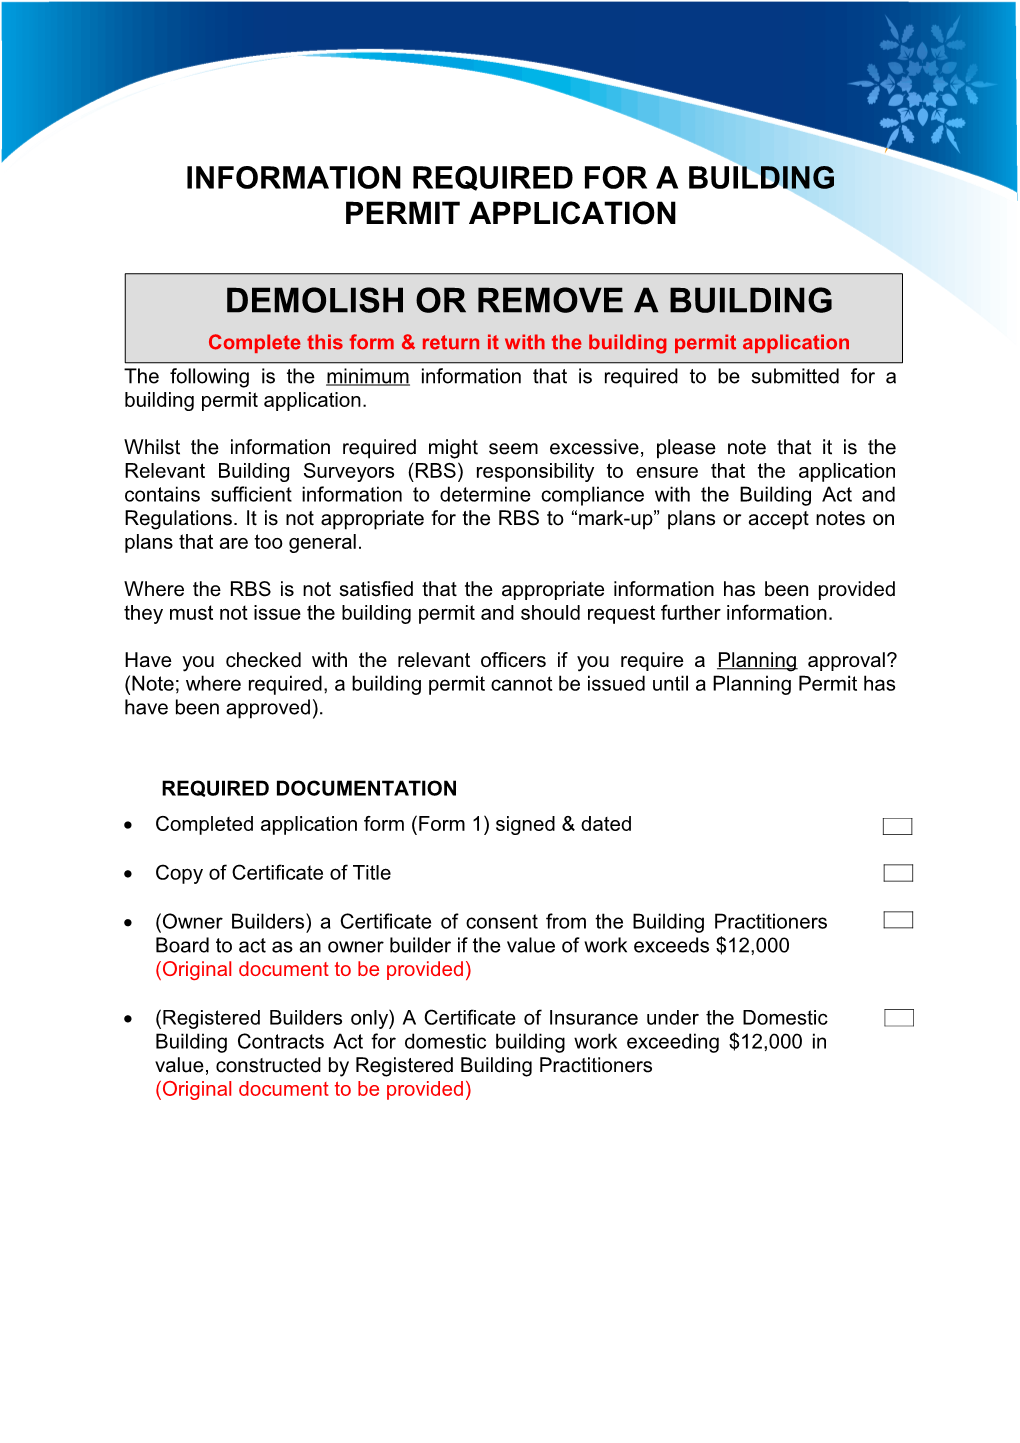 Does Your Application for Building Permit Include the Following